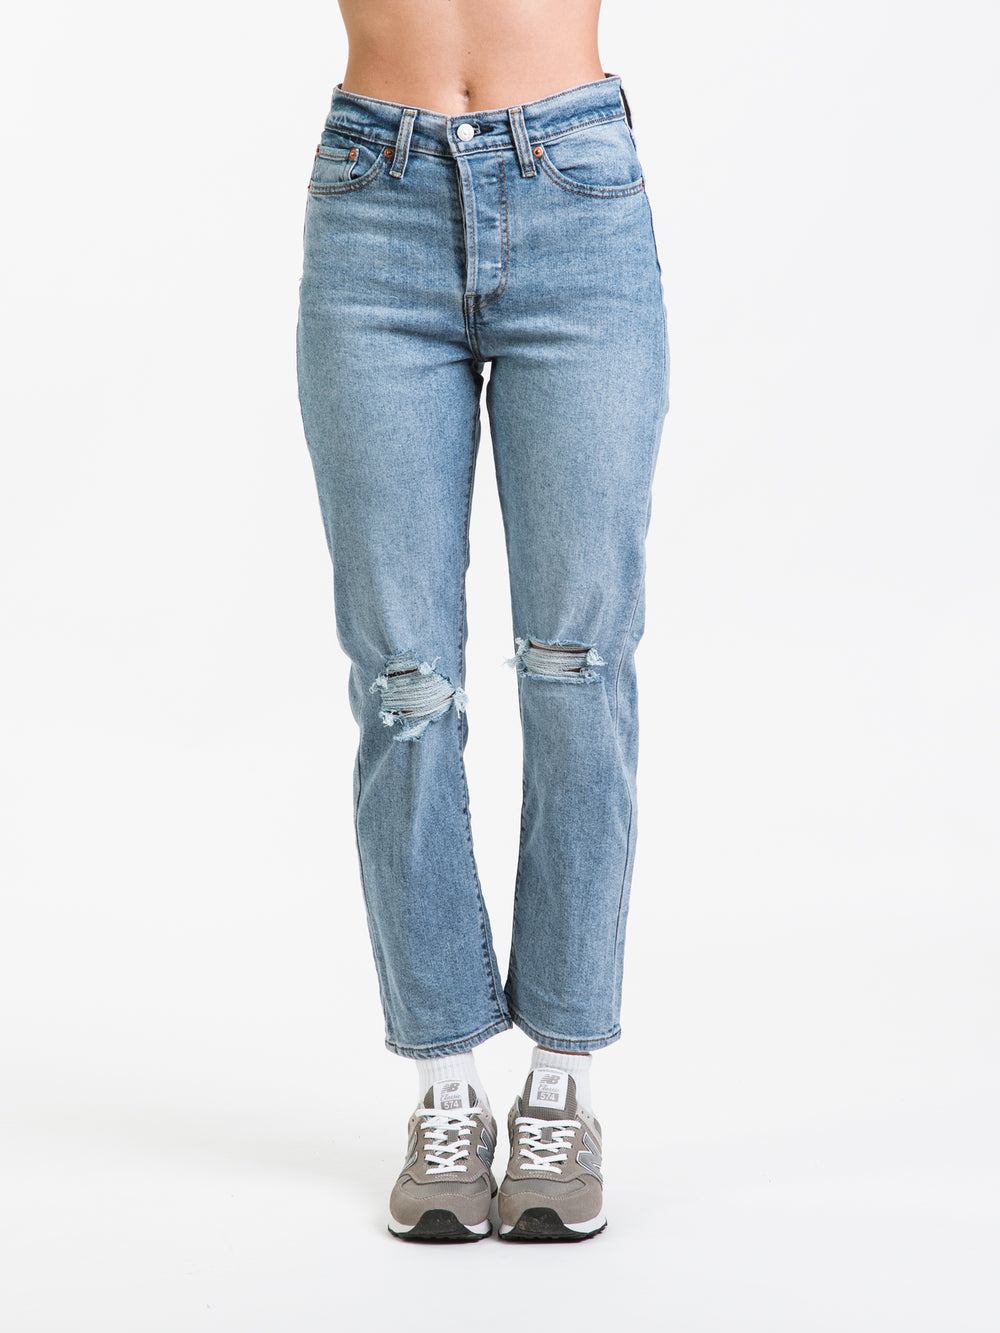 LEVIS WEDGIE STRAIGHT JEAN  - CLEARANCE